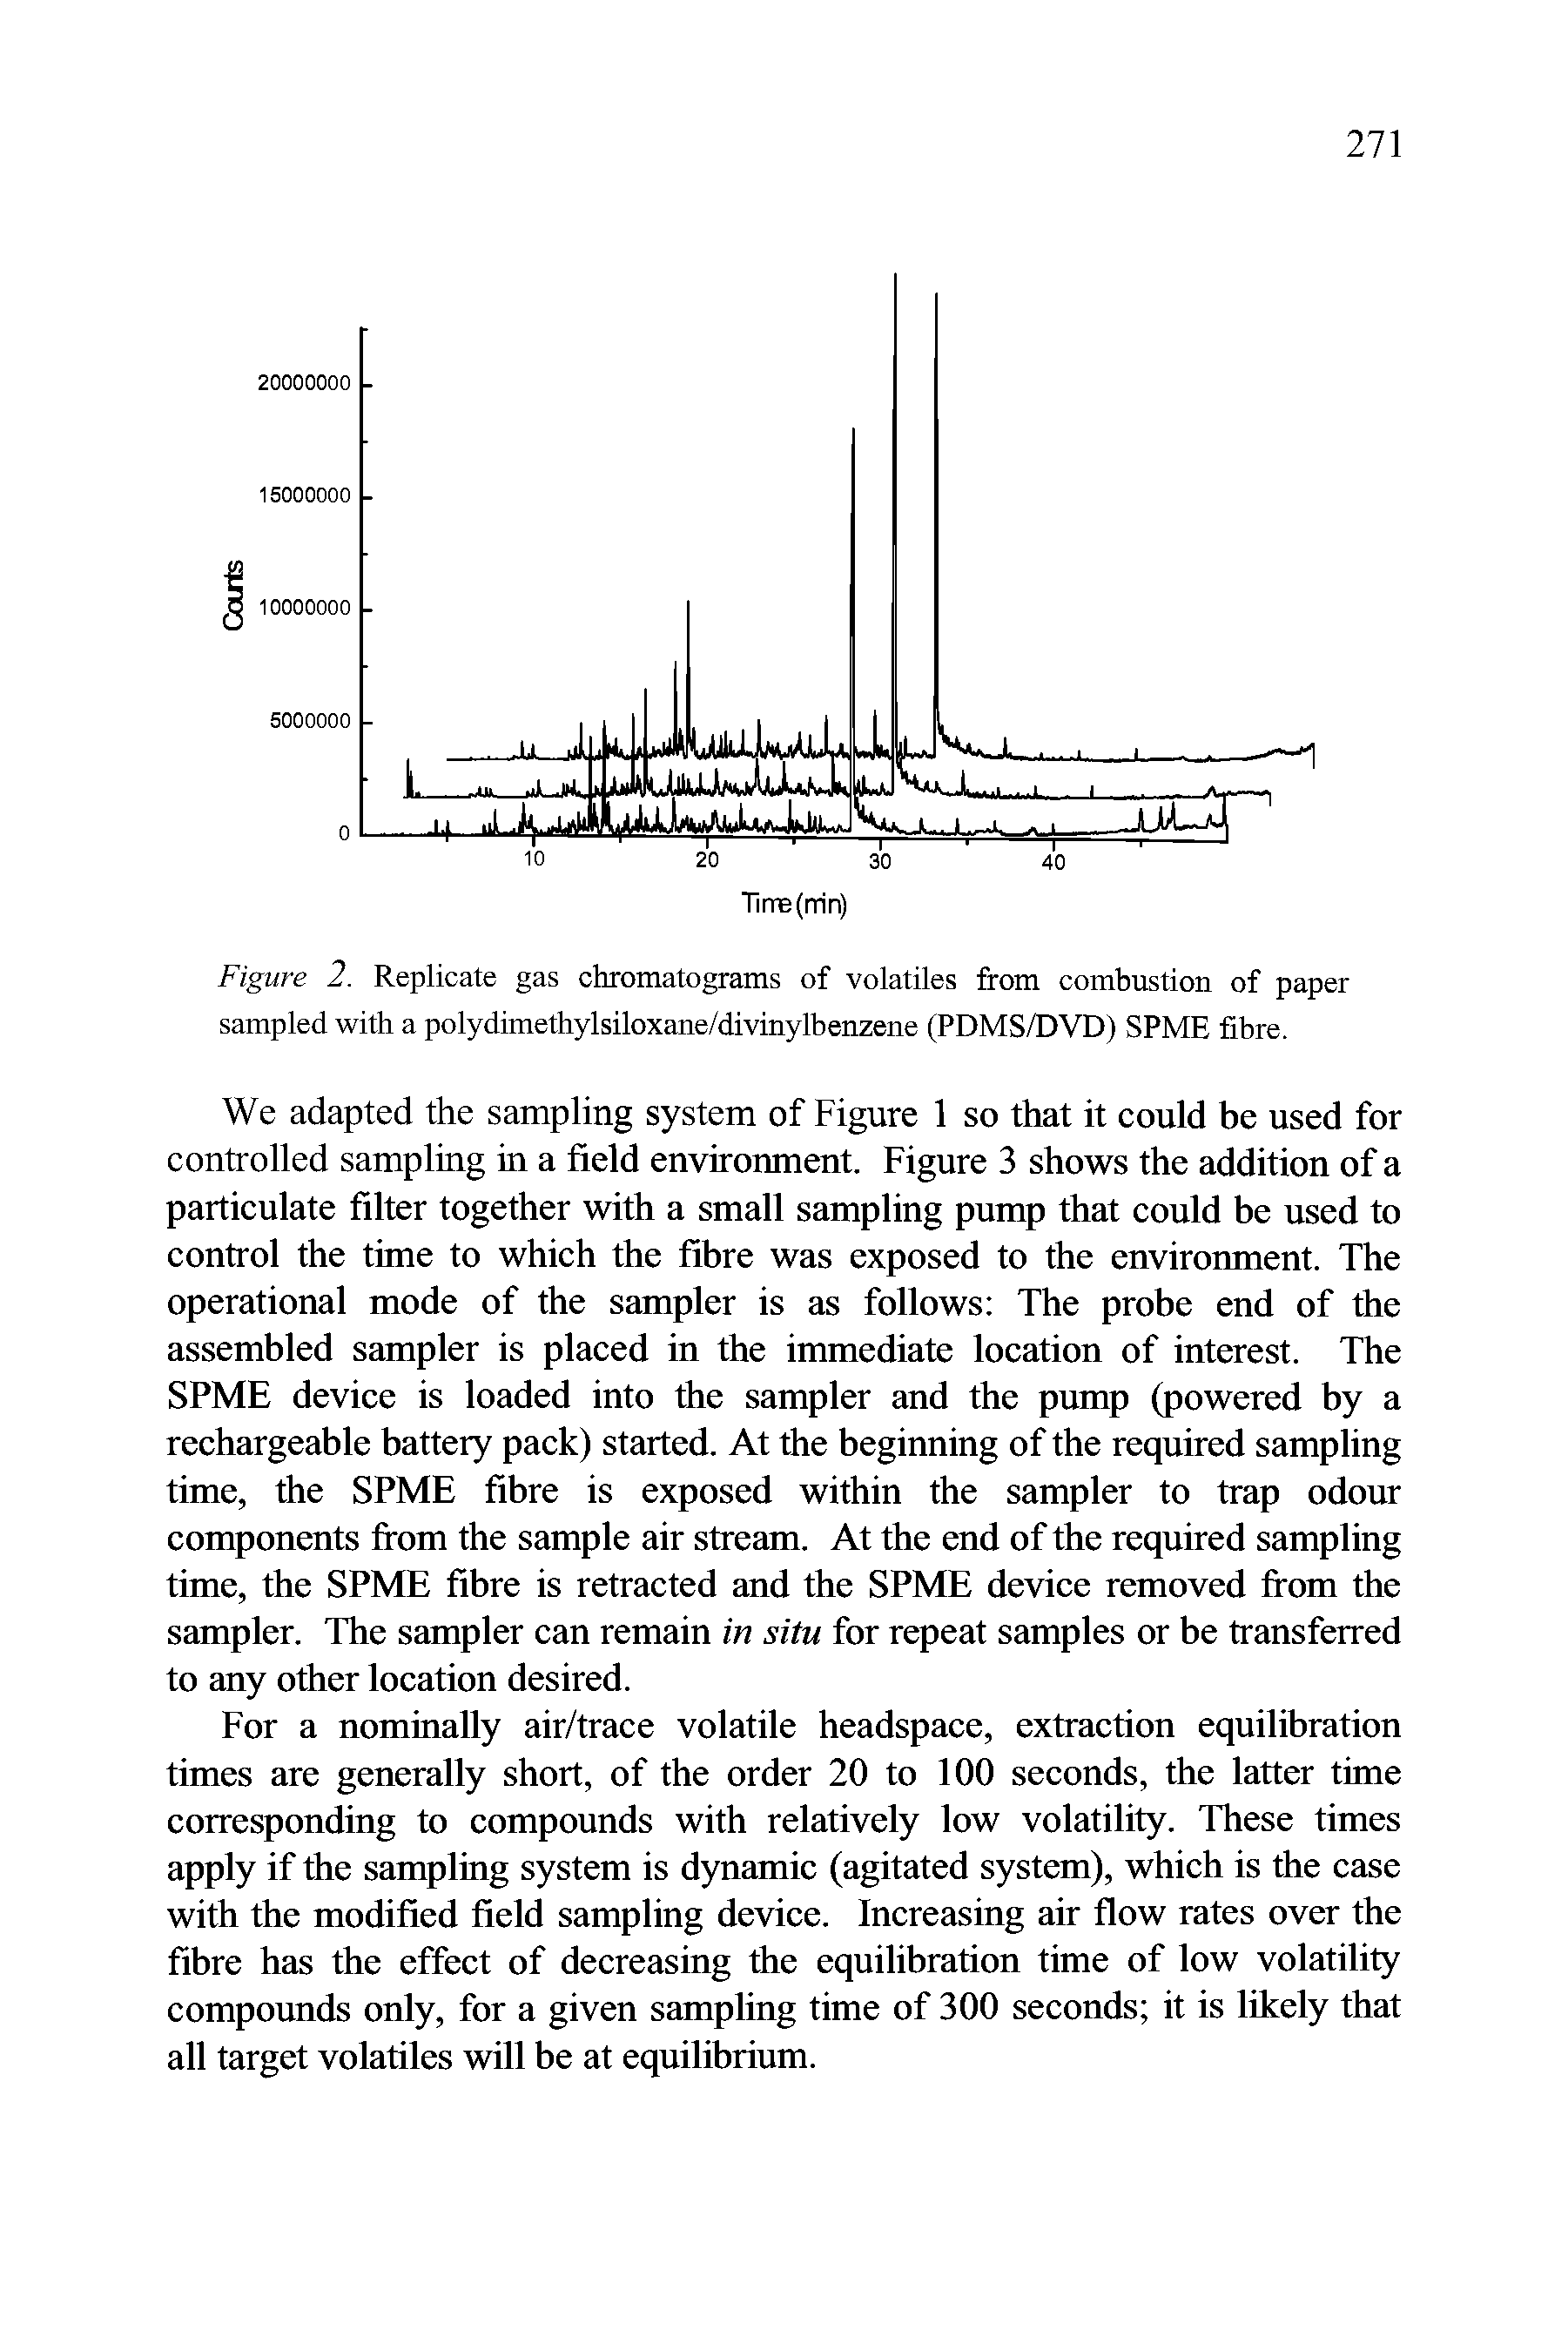 Figure 2. Replicate gas chromatograms of volatiles from combustion of paper sampled with a polydimethylsiloxane/divinylbenzene (PDMS/DVD) SPME fibre.